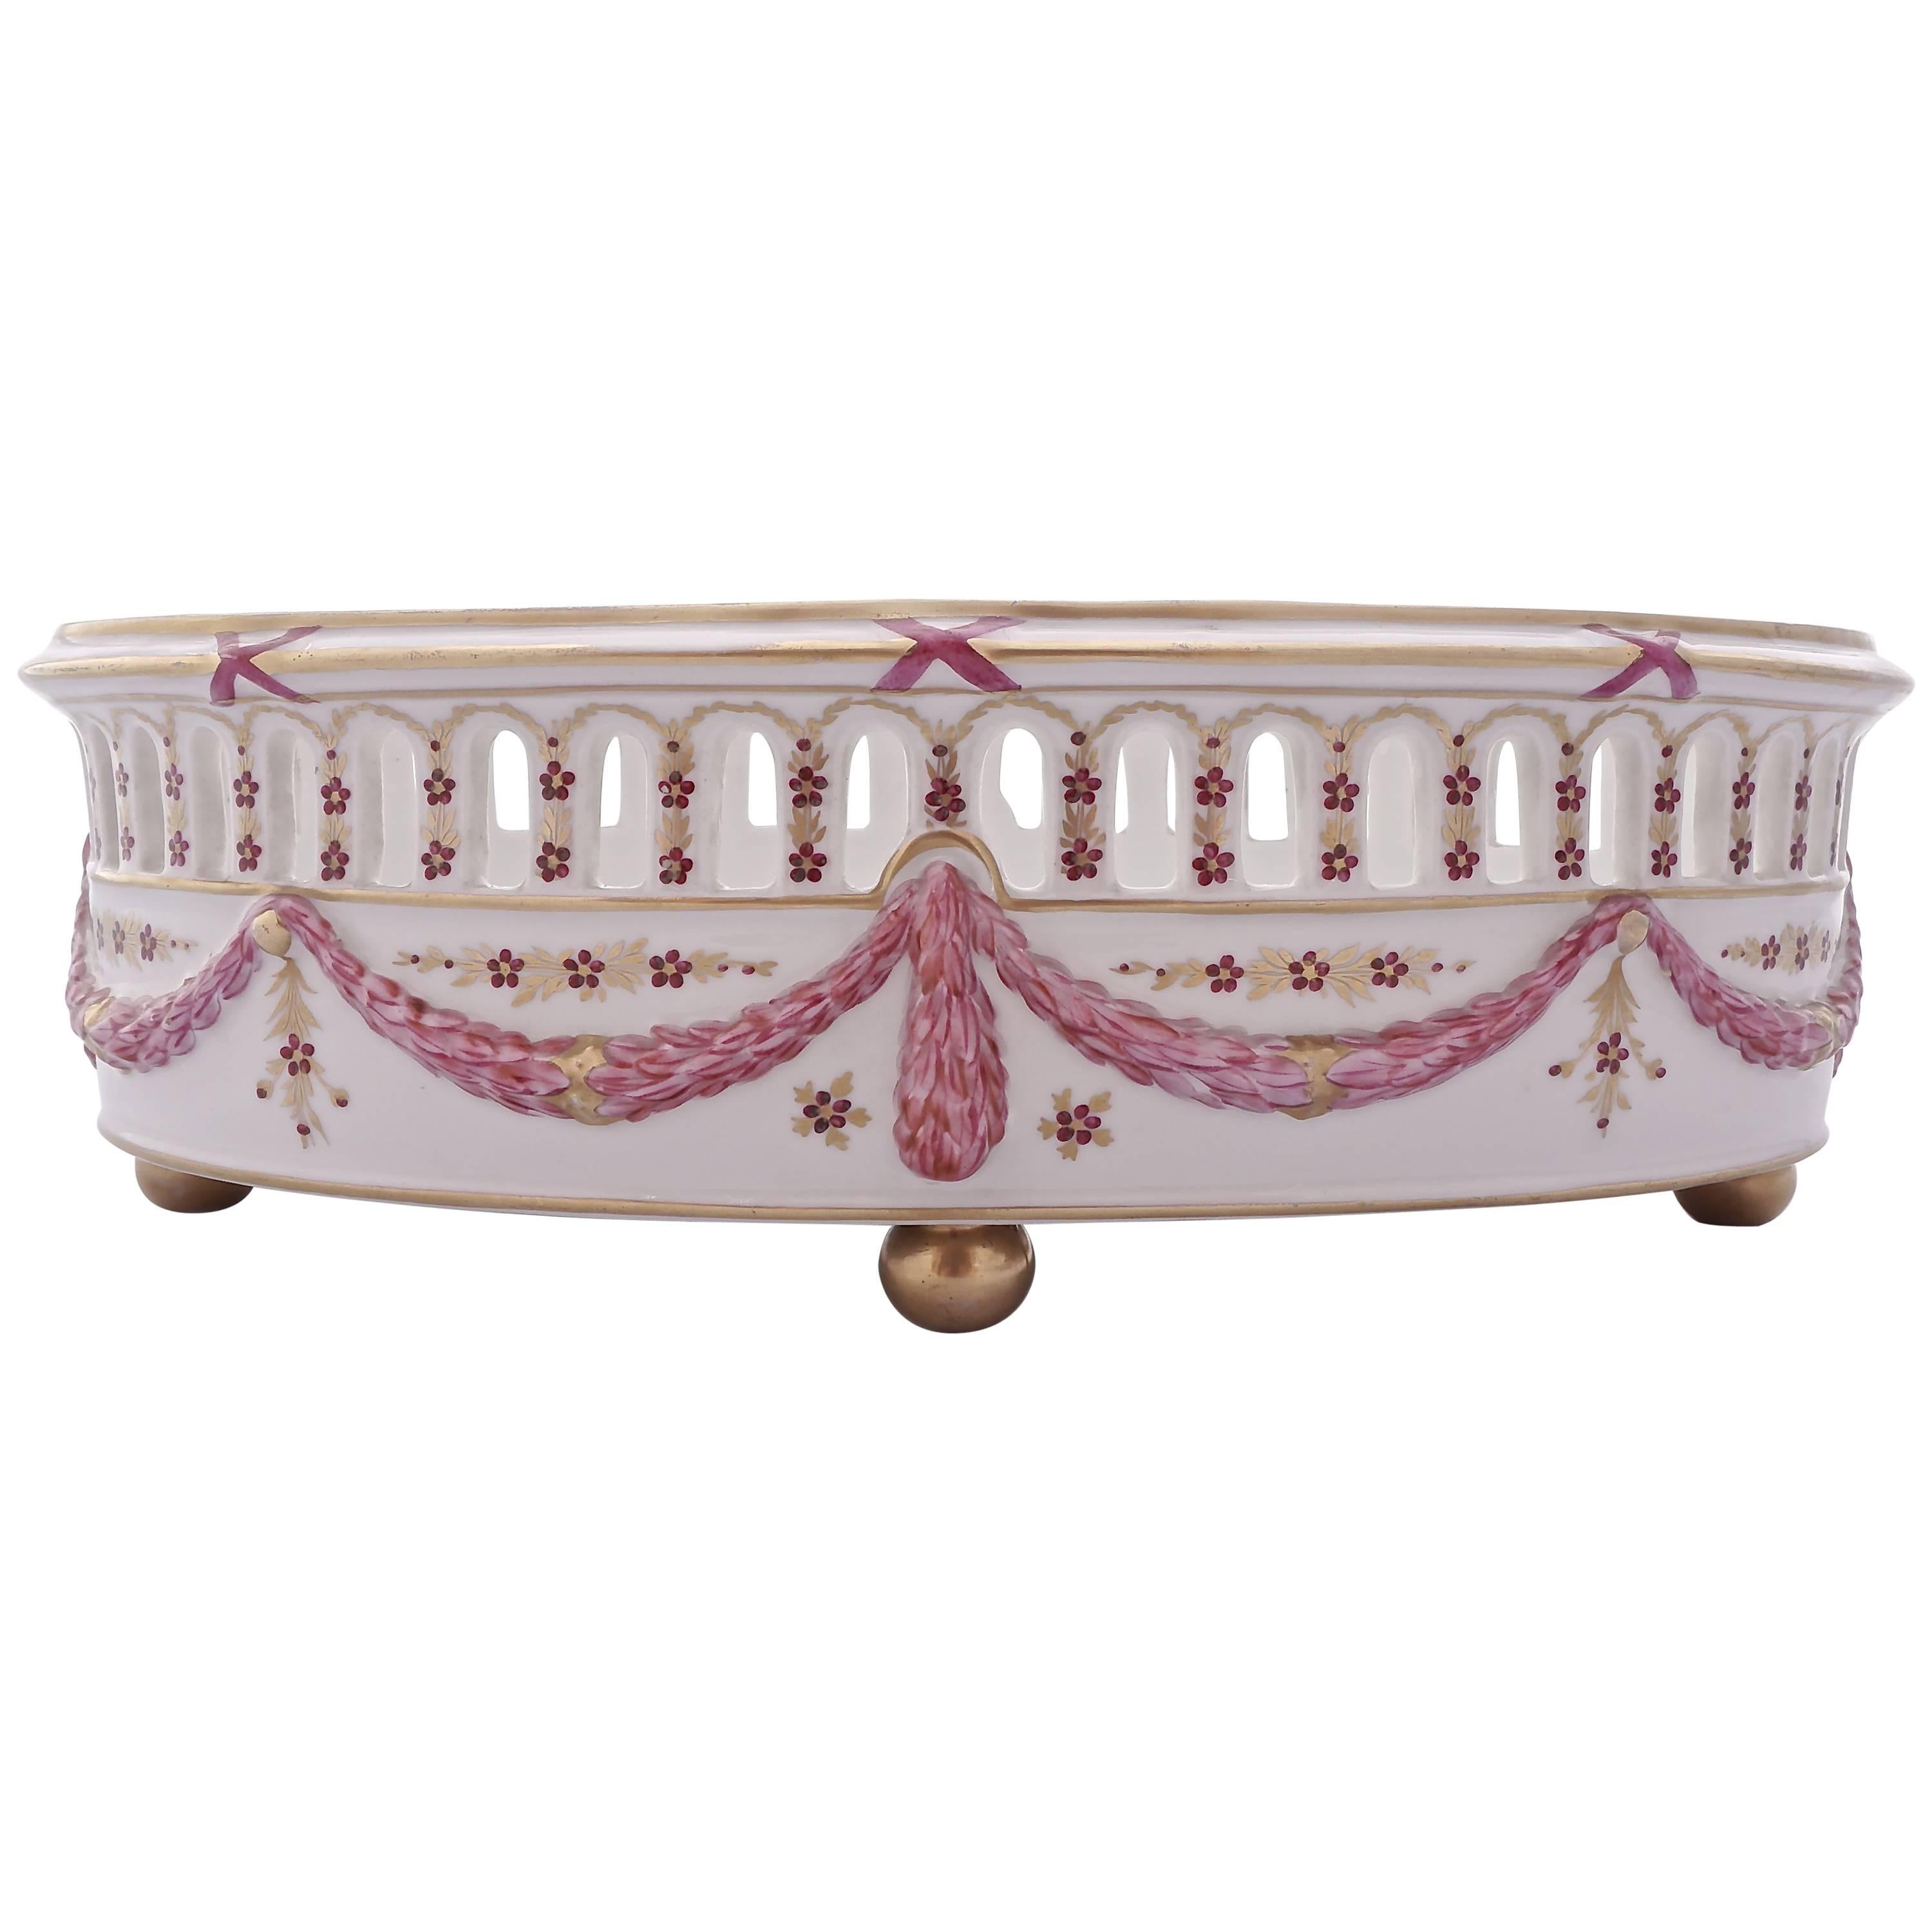 Delvaux R. Royale Paris Hand Painted Pink and Gold Oval Porcelain Basket